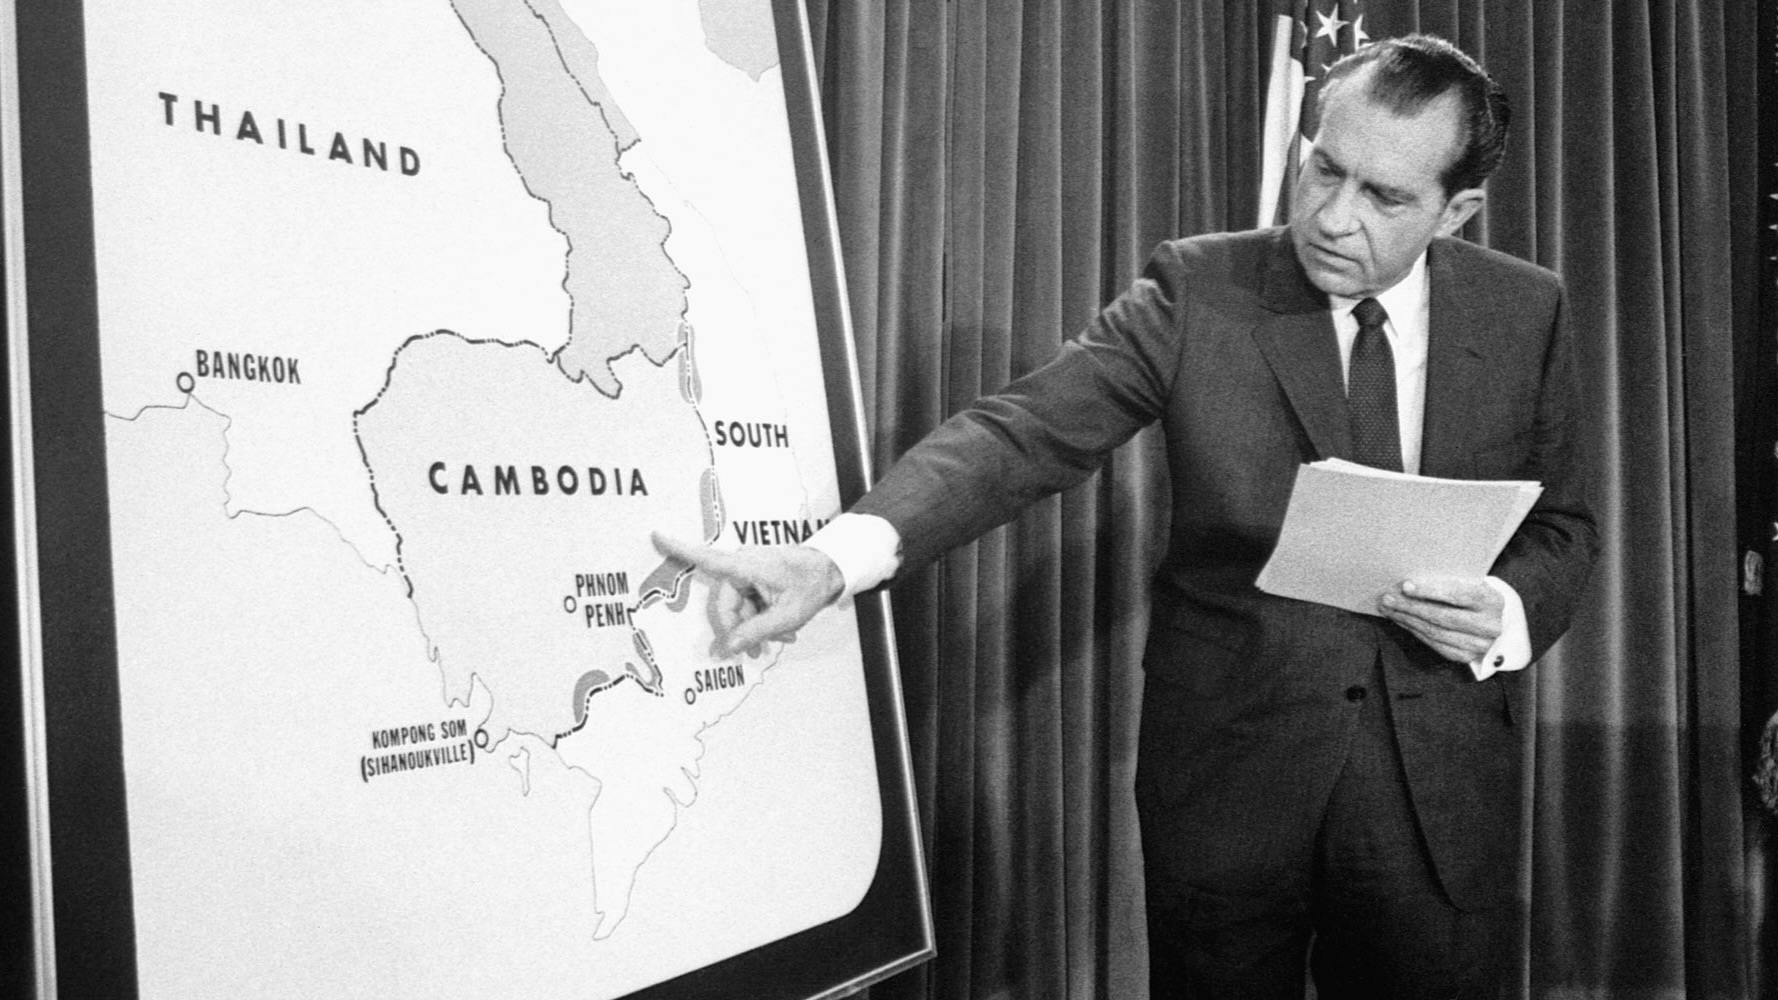 How Nixon’s Invasion of Cambodia Triggered a Check on Presidential Power